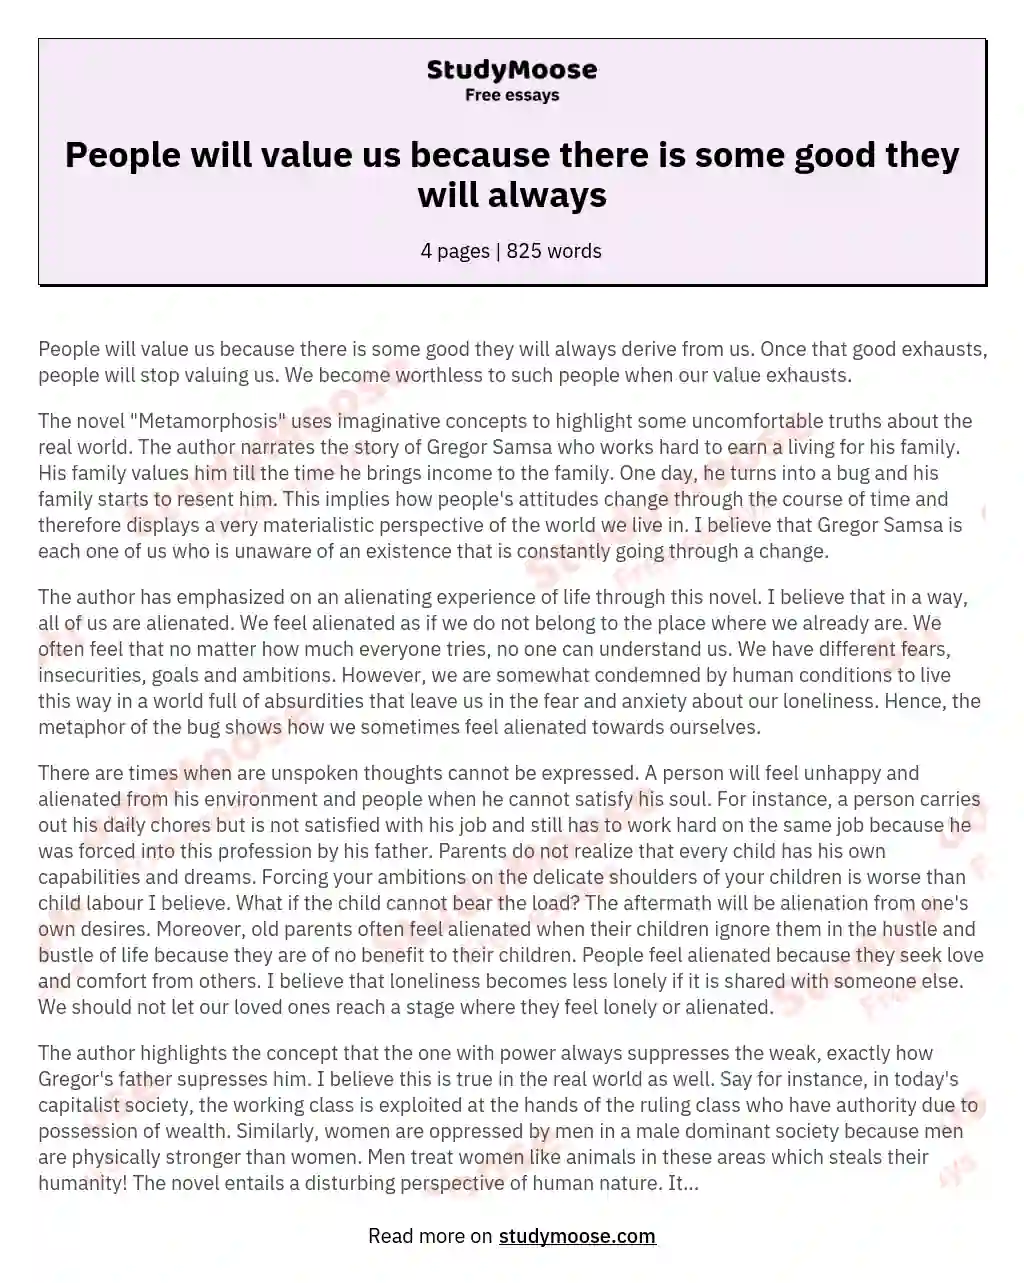 People will value us because there is some good they will always essay